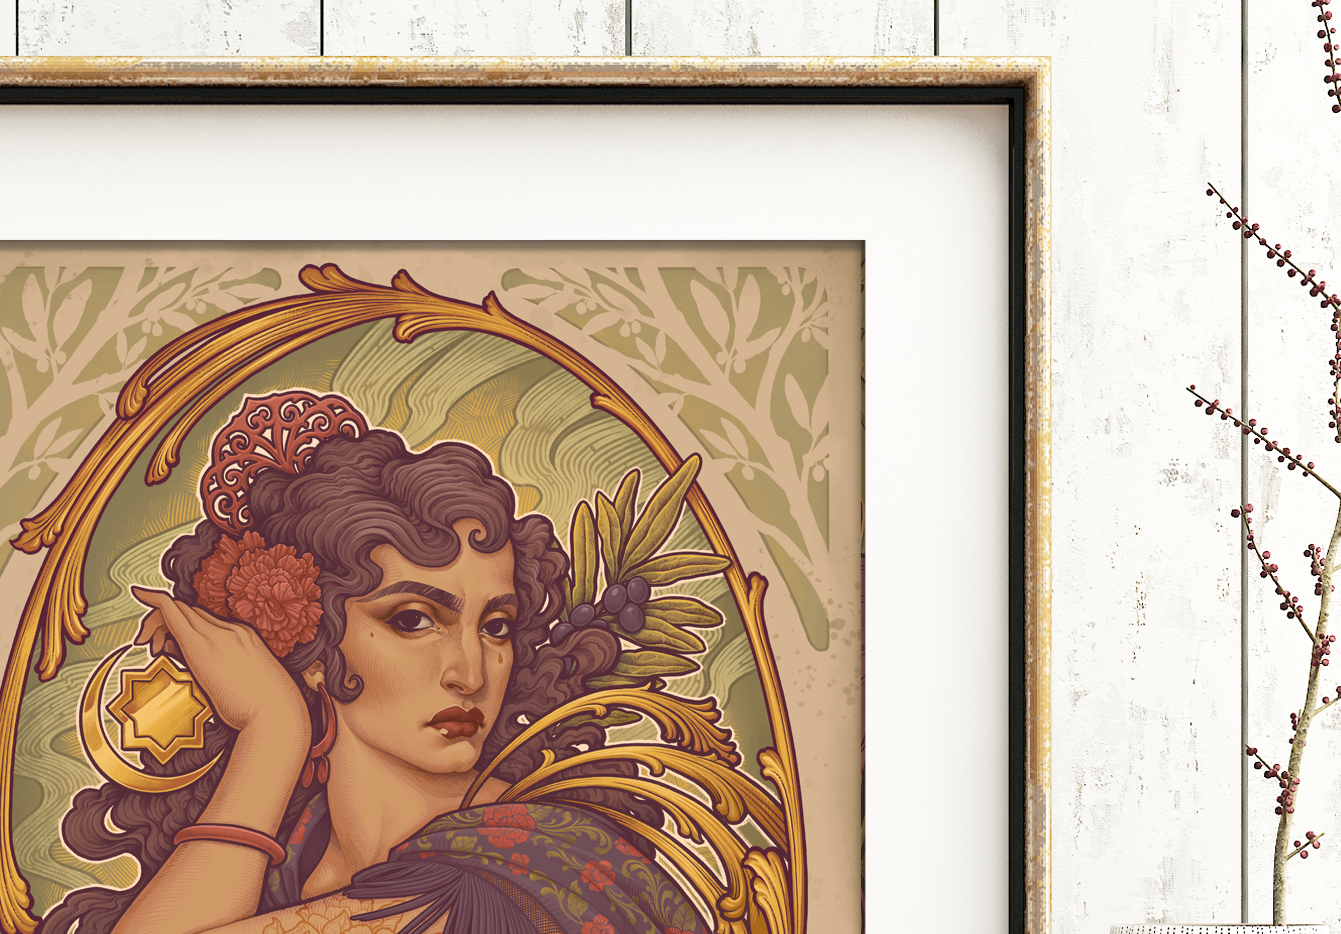 ANDALUSIAN ALLEGORY NOUVEAU Printed Framed Art